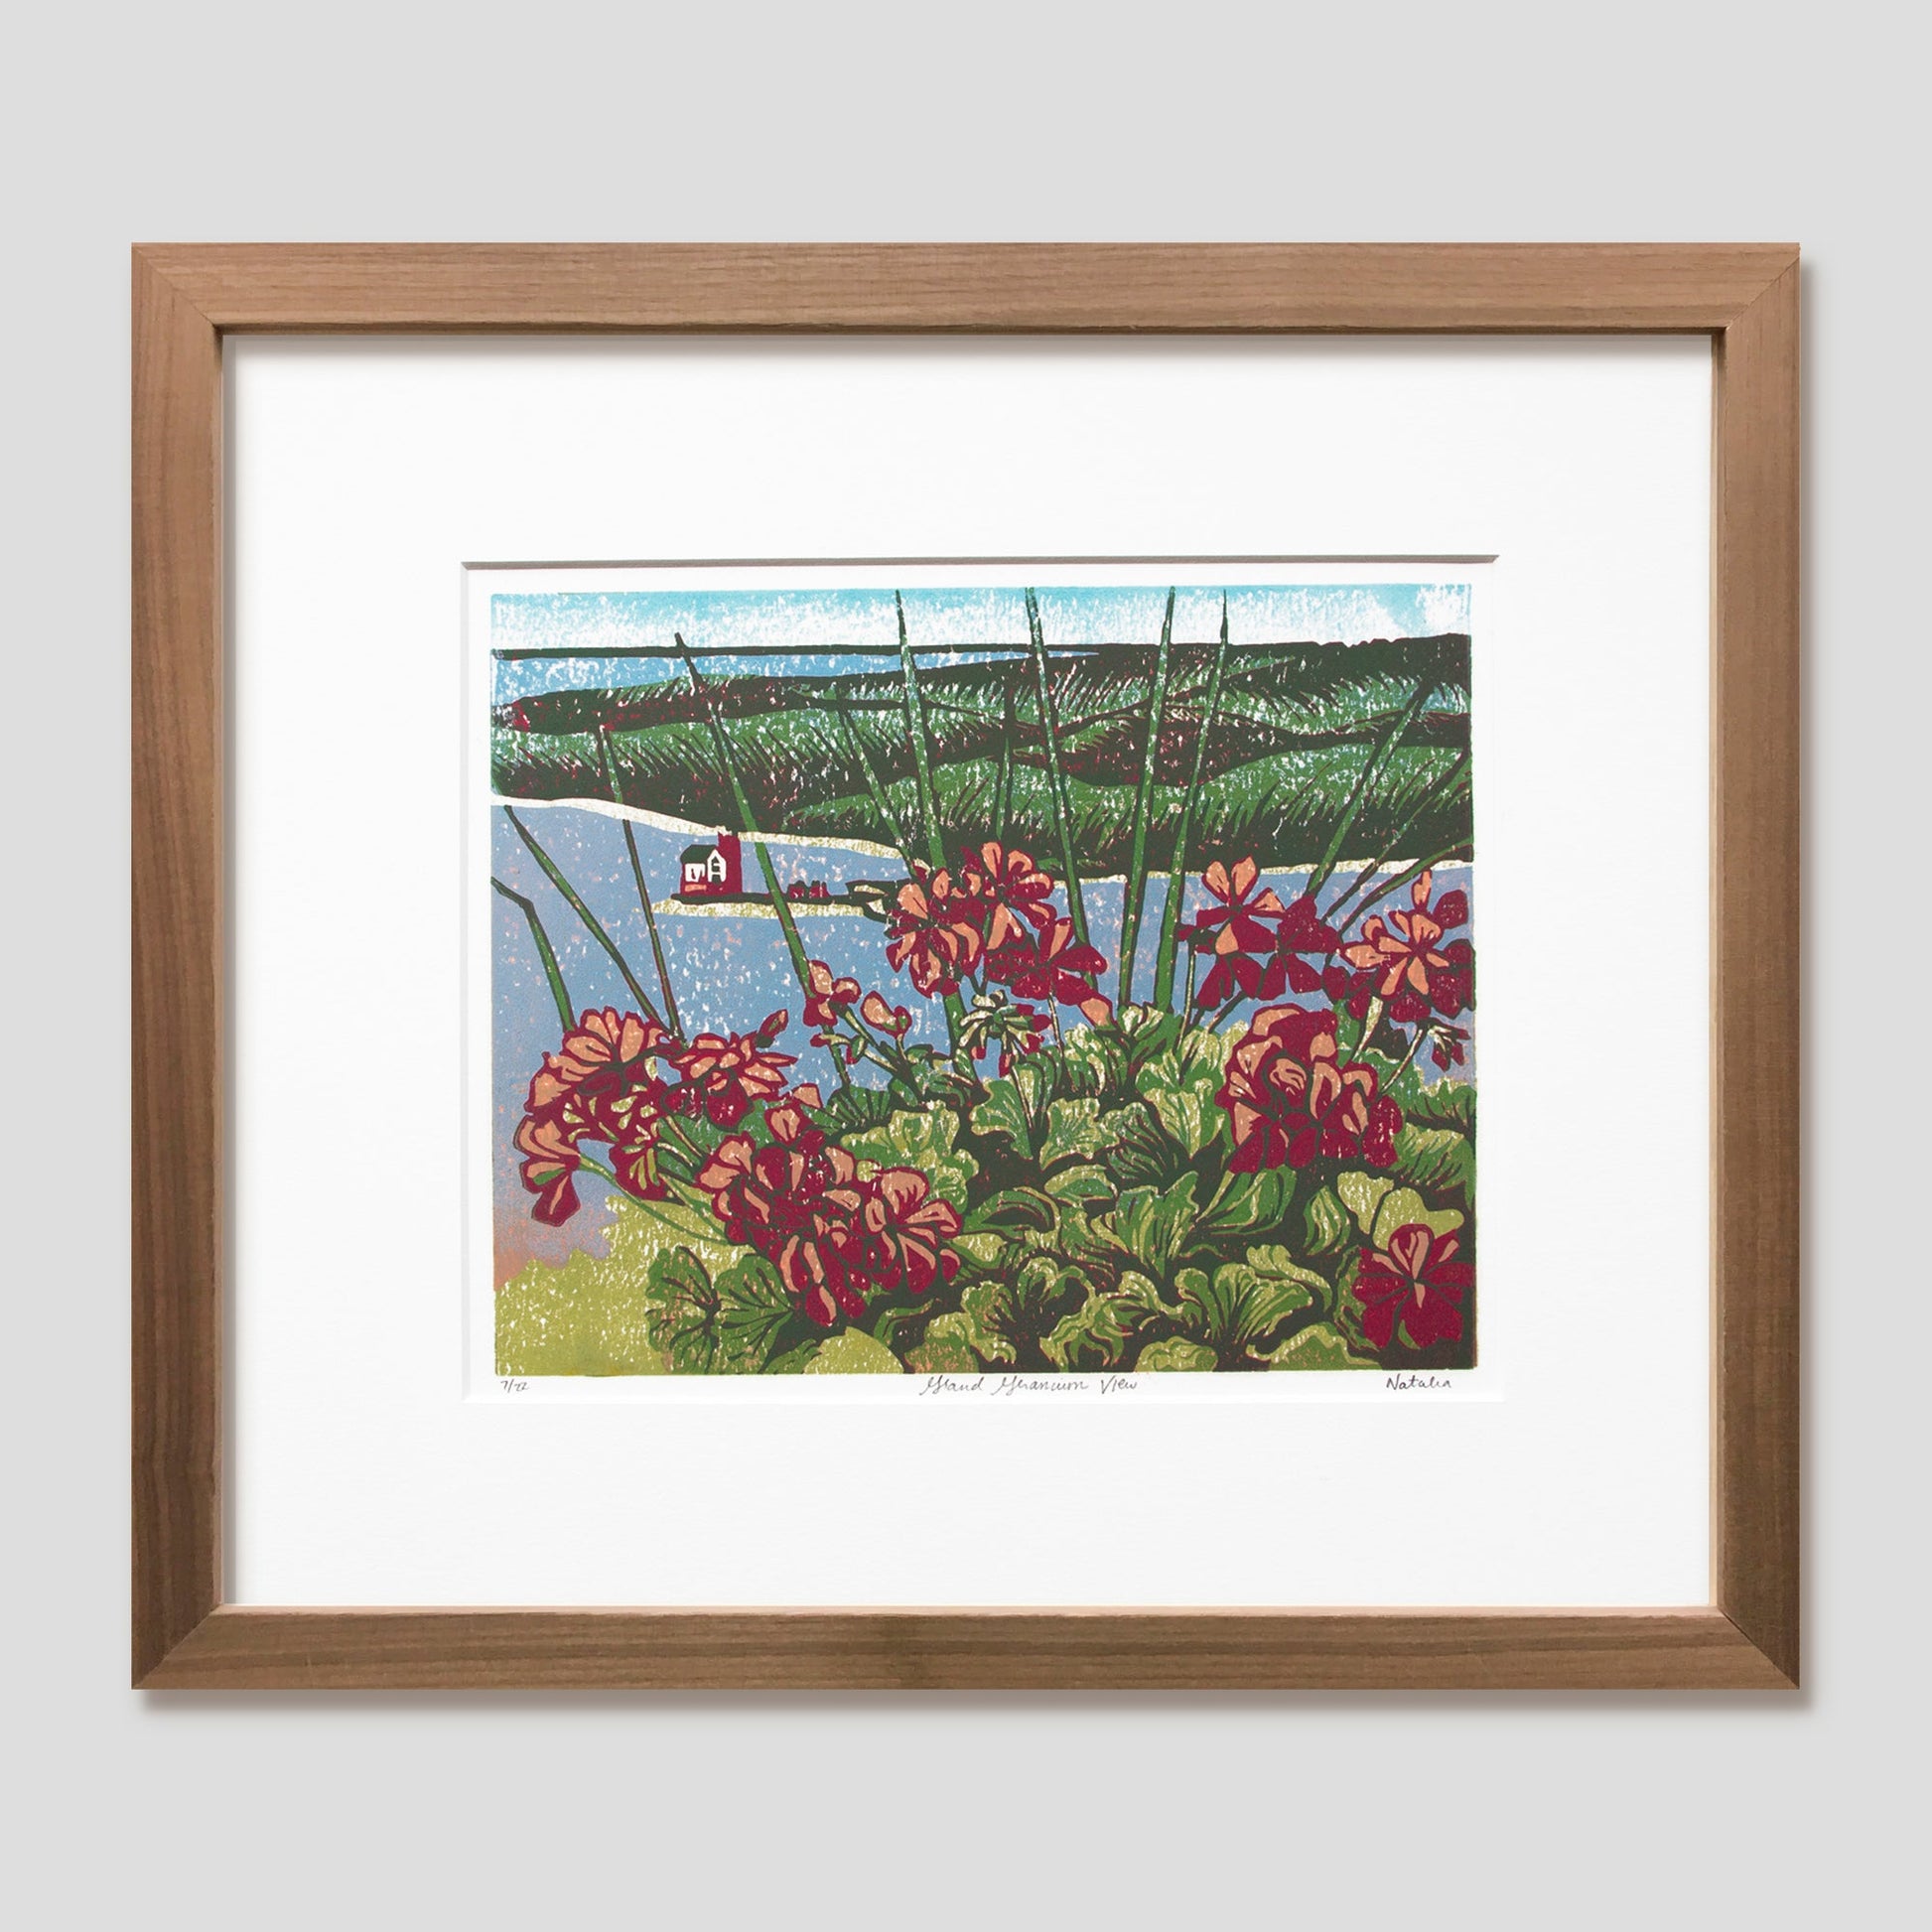 Grand Hotel art featuring the view of Round Island Lighthouse from the hotel's geranium-lined porch by printmaker Natalia Wohletz of Peninsula Prints titled Grand Geraniums.